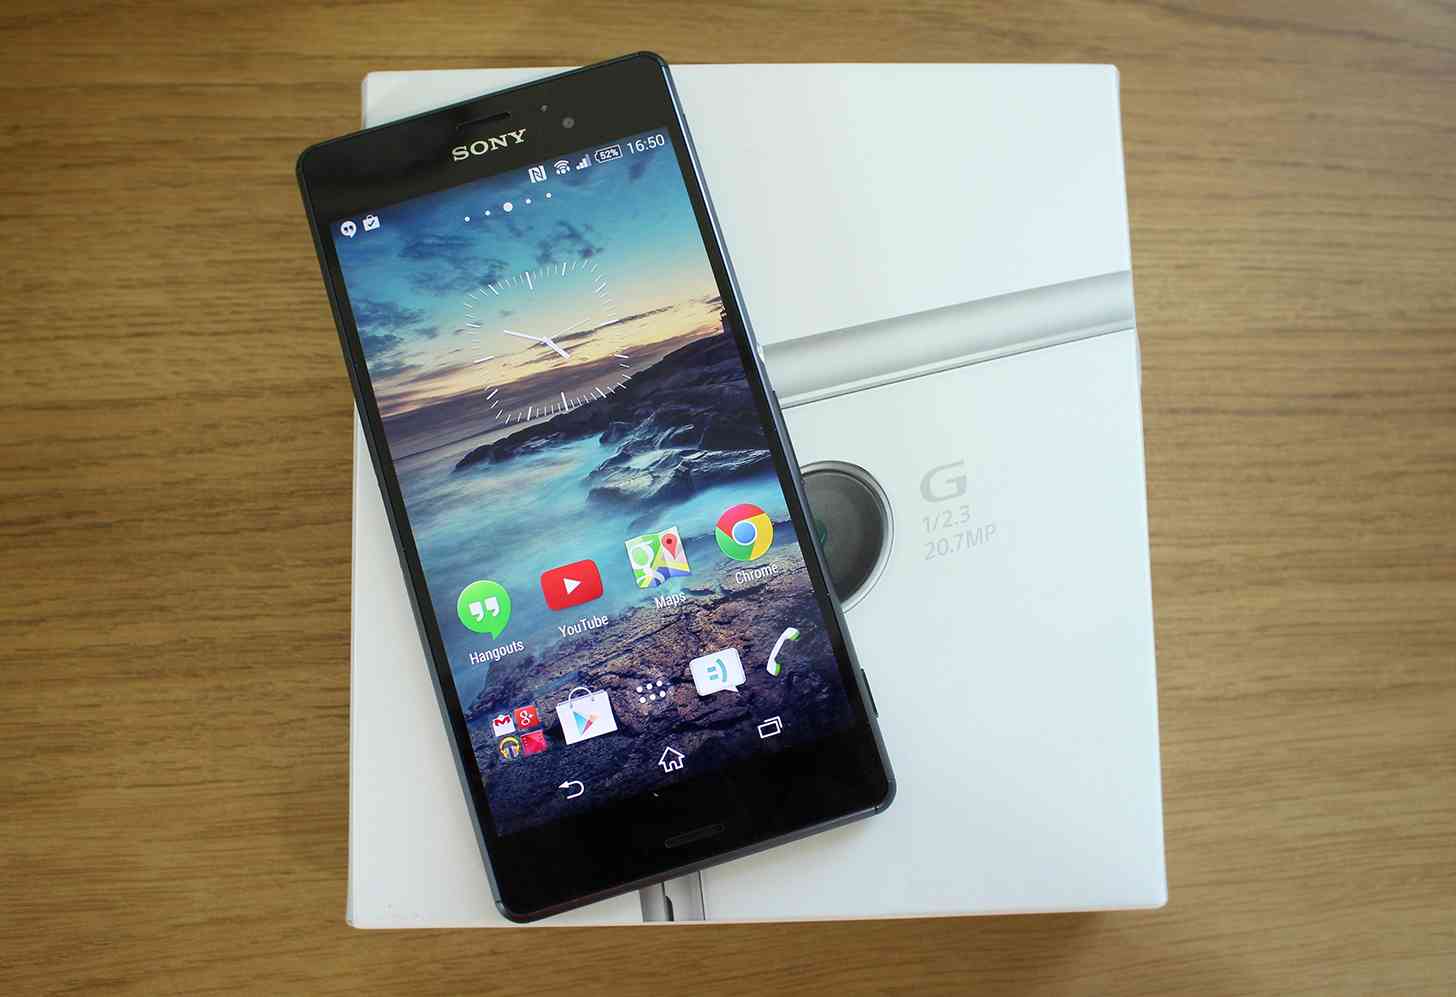 Sony Xperia Z3 hands on